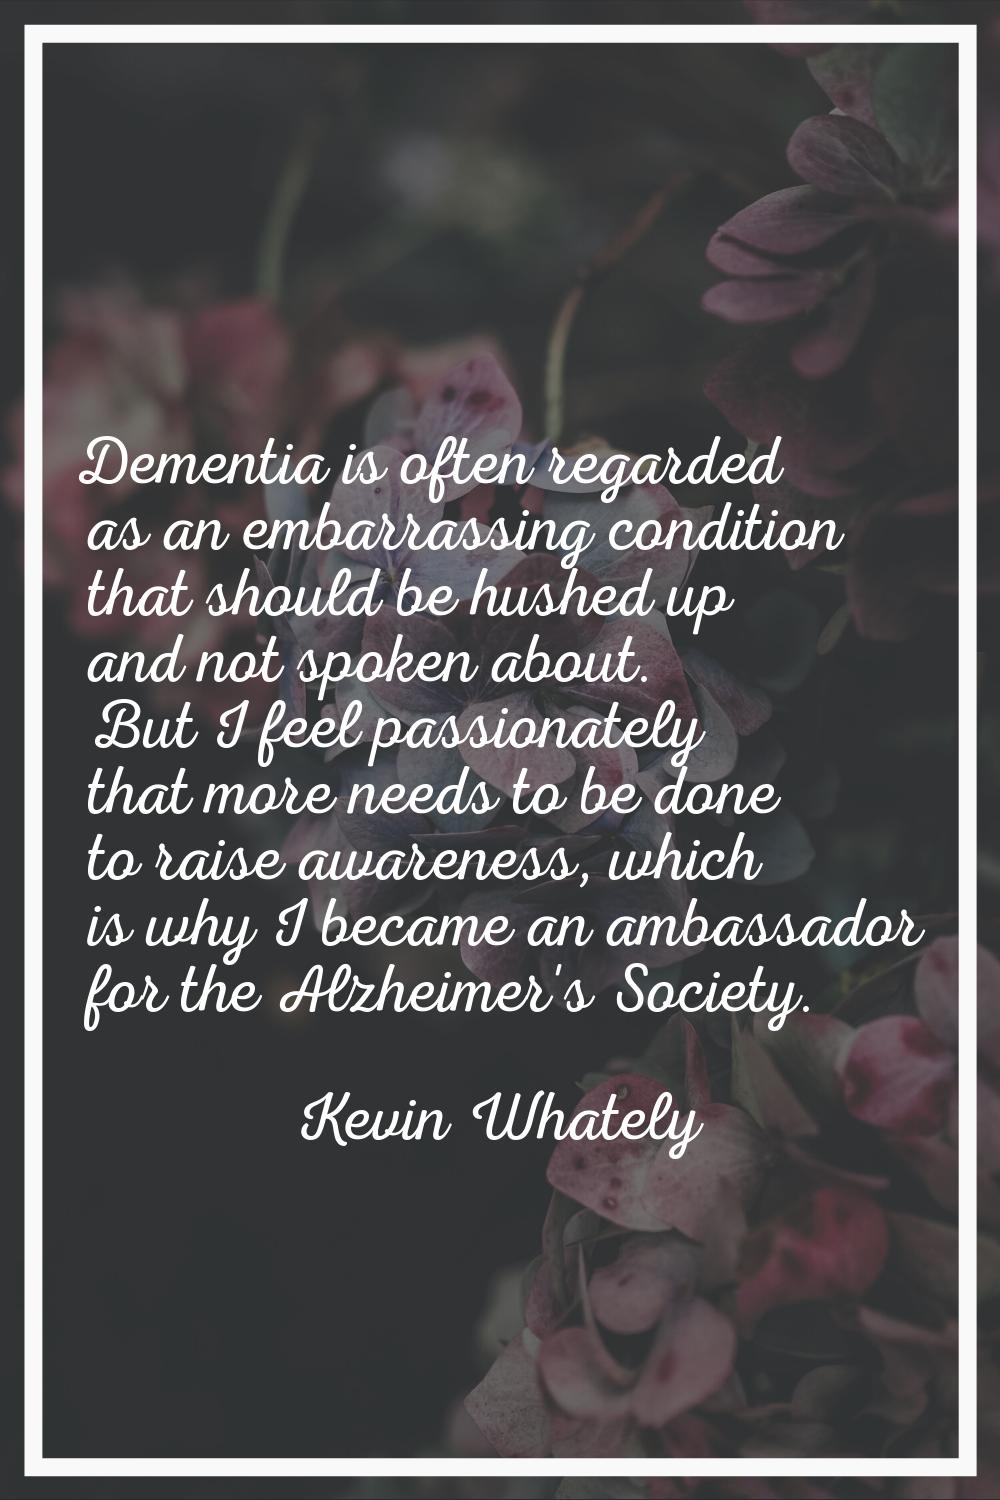 Dementia is often regarded as an embarrassing condition that should be hushed up and not spoken abo